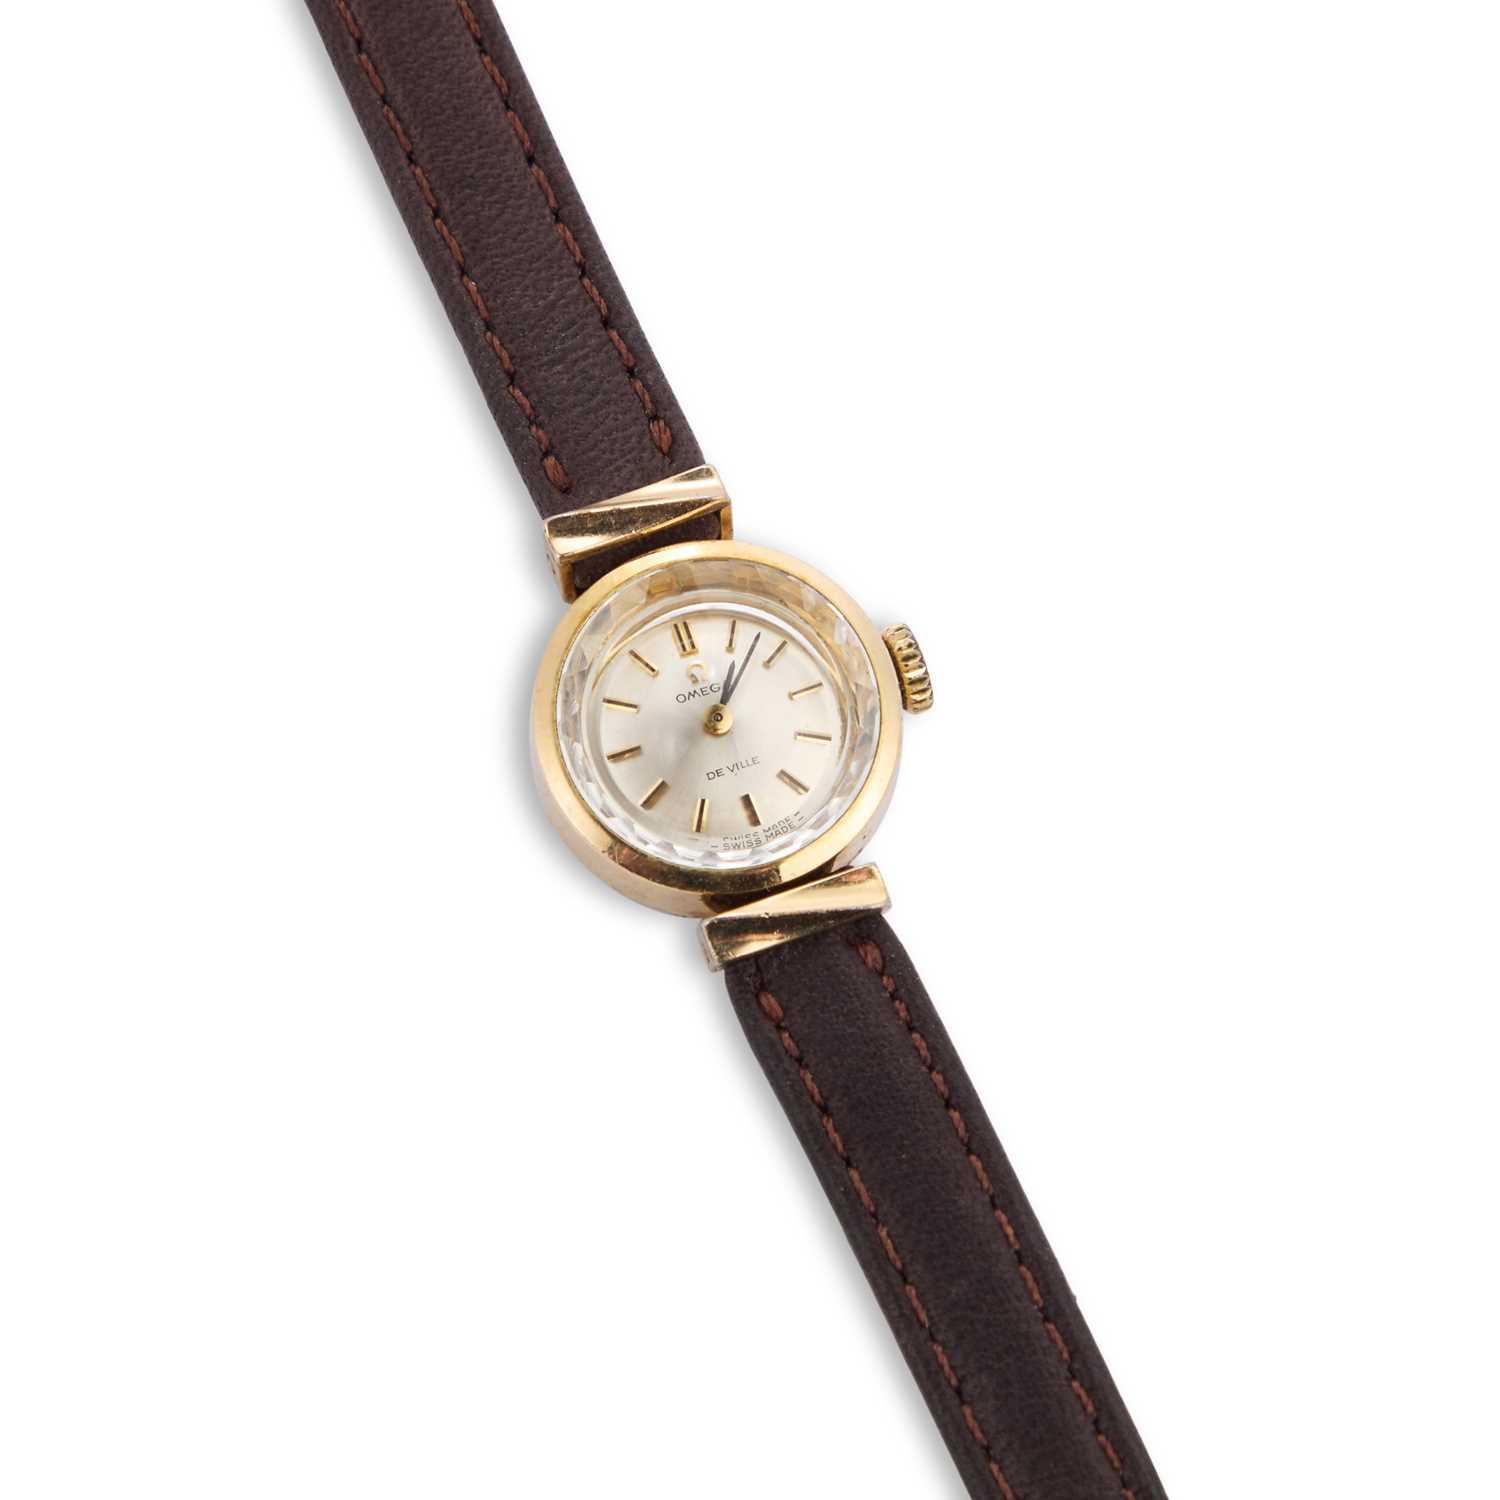 A LADYS GOLD PLATED OMEGA STRAP WATCH